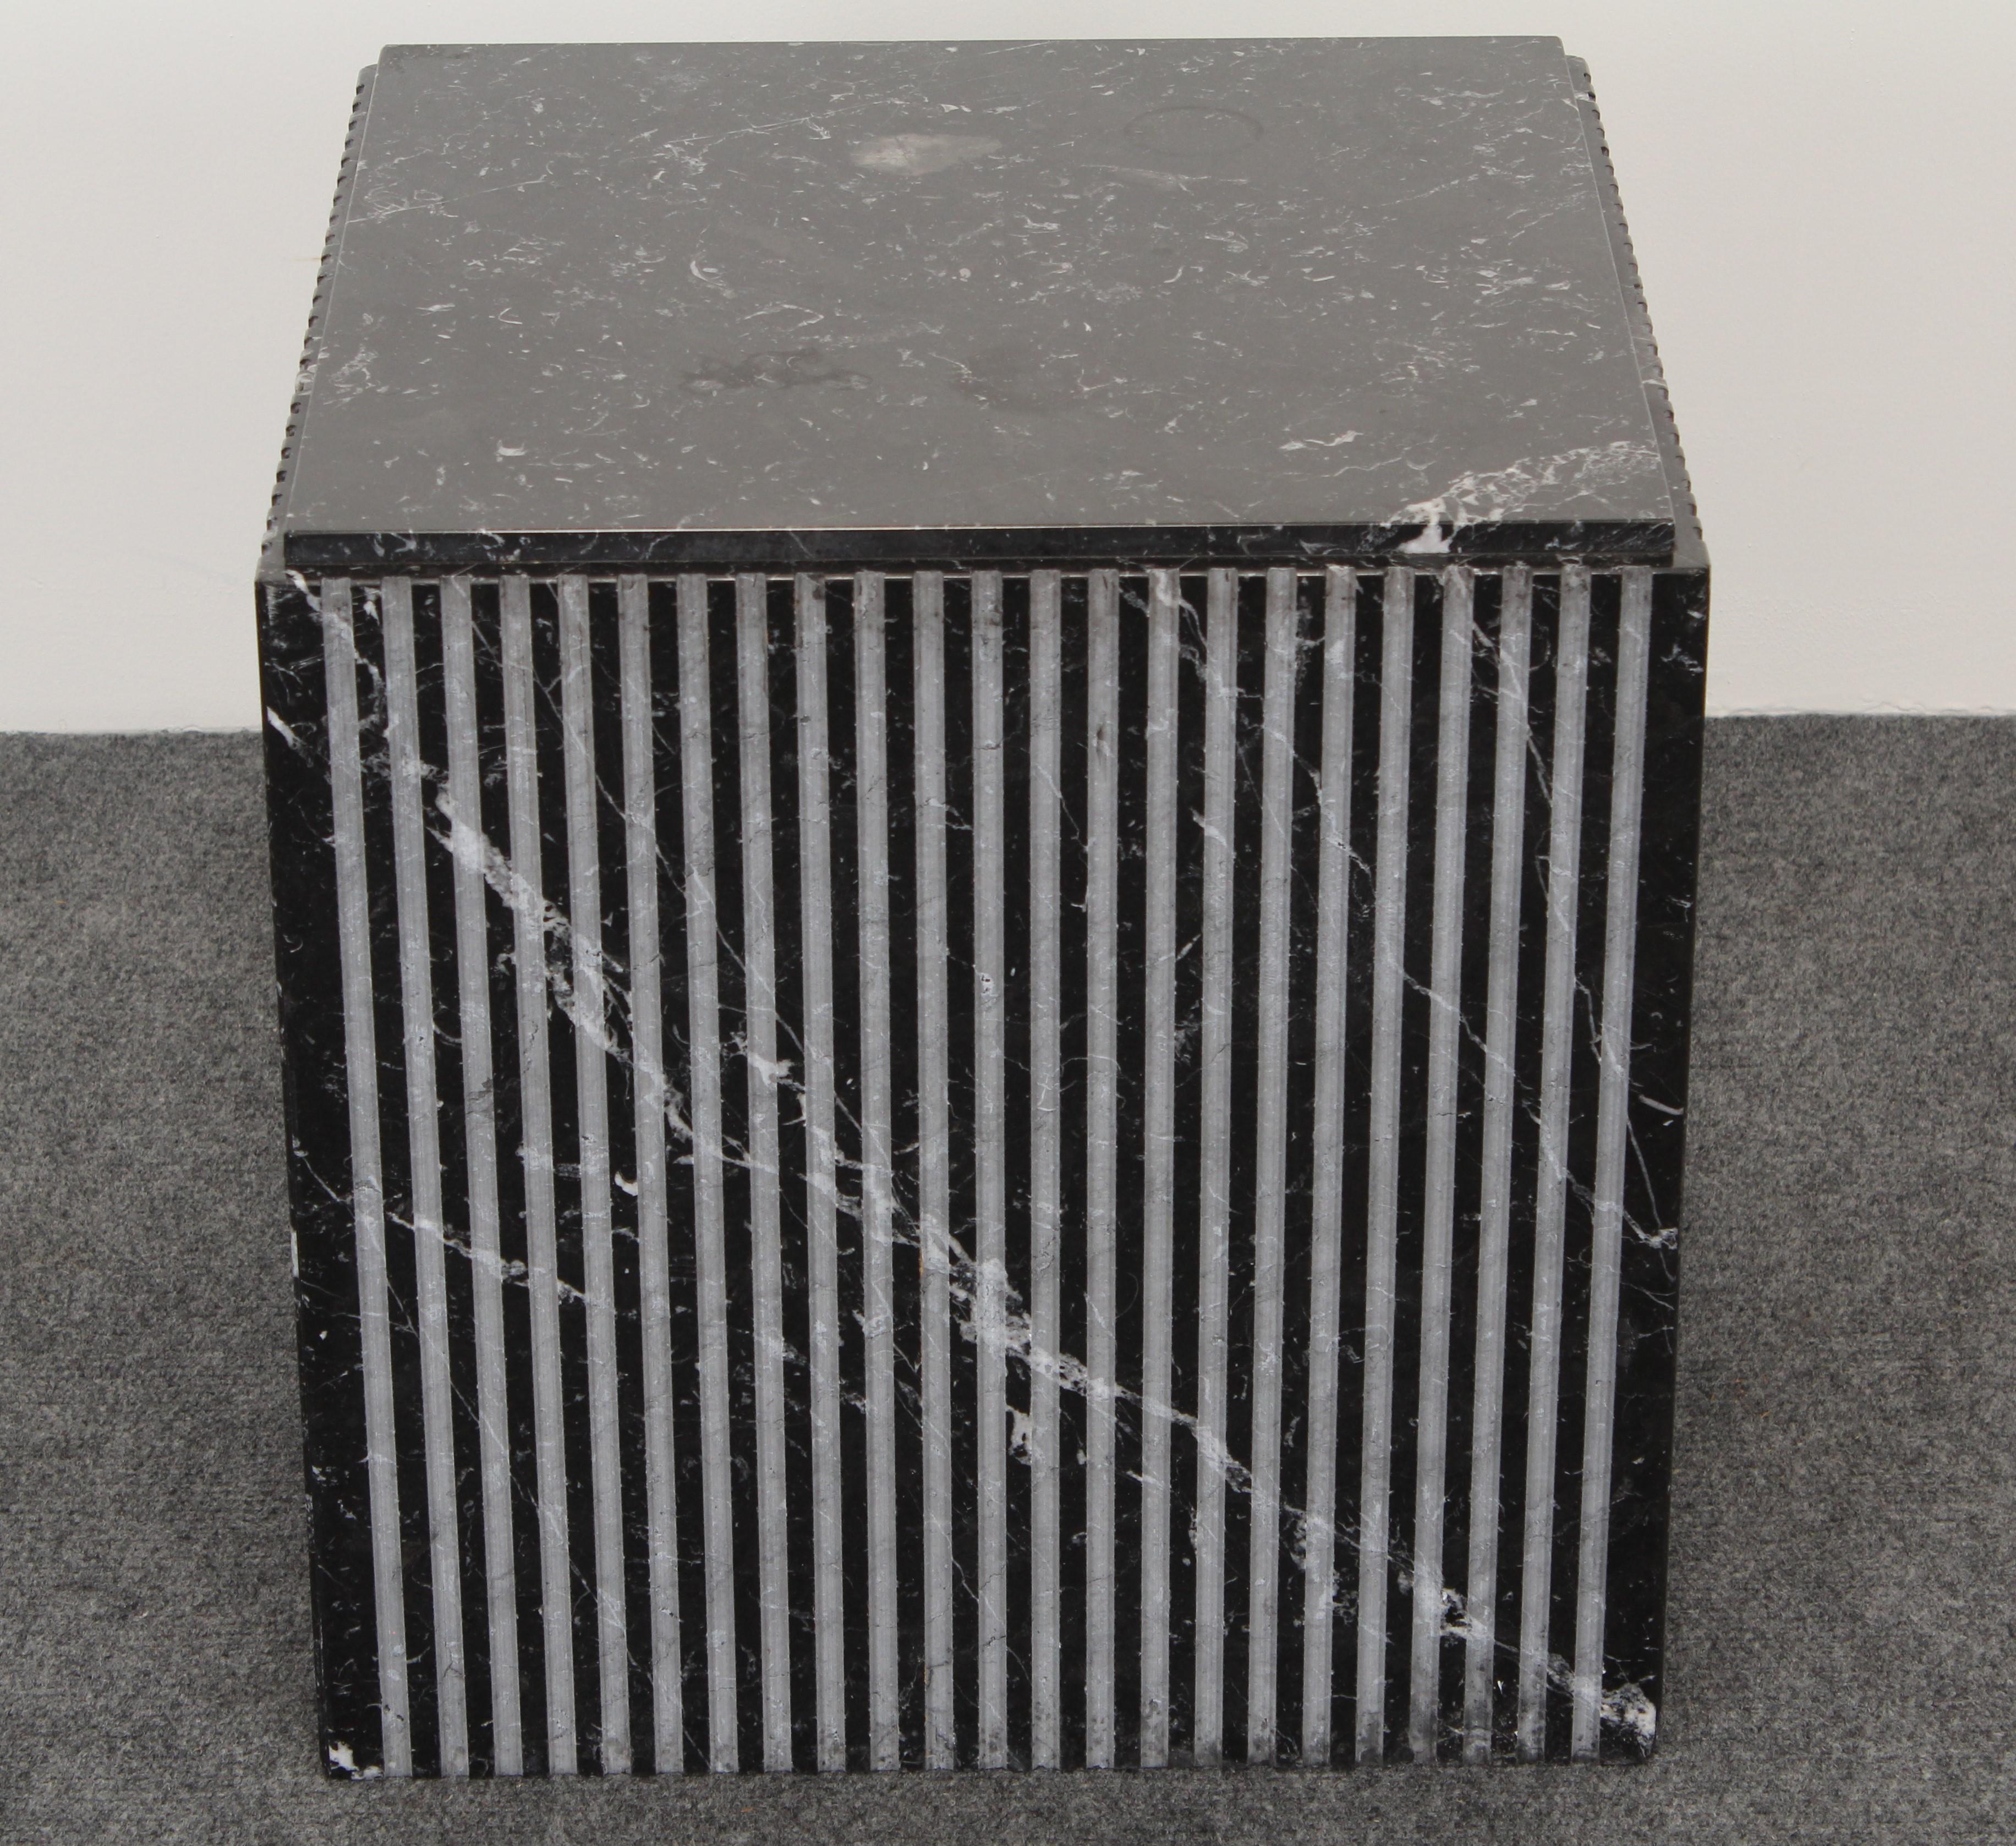 A graphic and incised black and white Sardegna Italian marble pedestal, side table or end table, 1980s. An unusual pedestal with multiple Dado cut sides in marble. 

Age appropriate wear including some minor chips to base, water marks on top, as